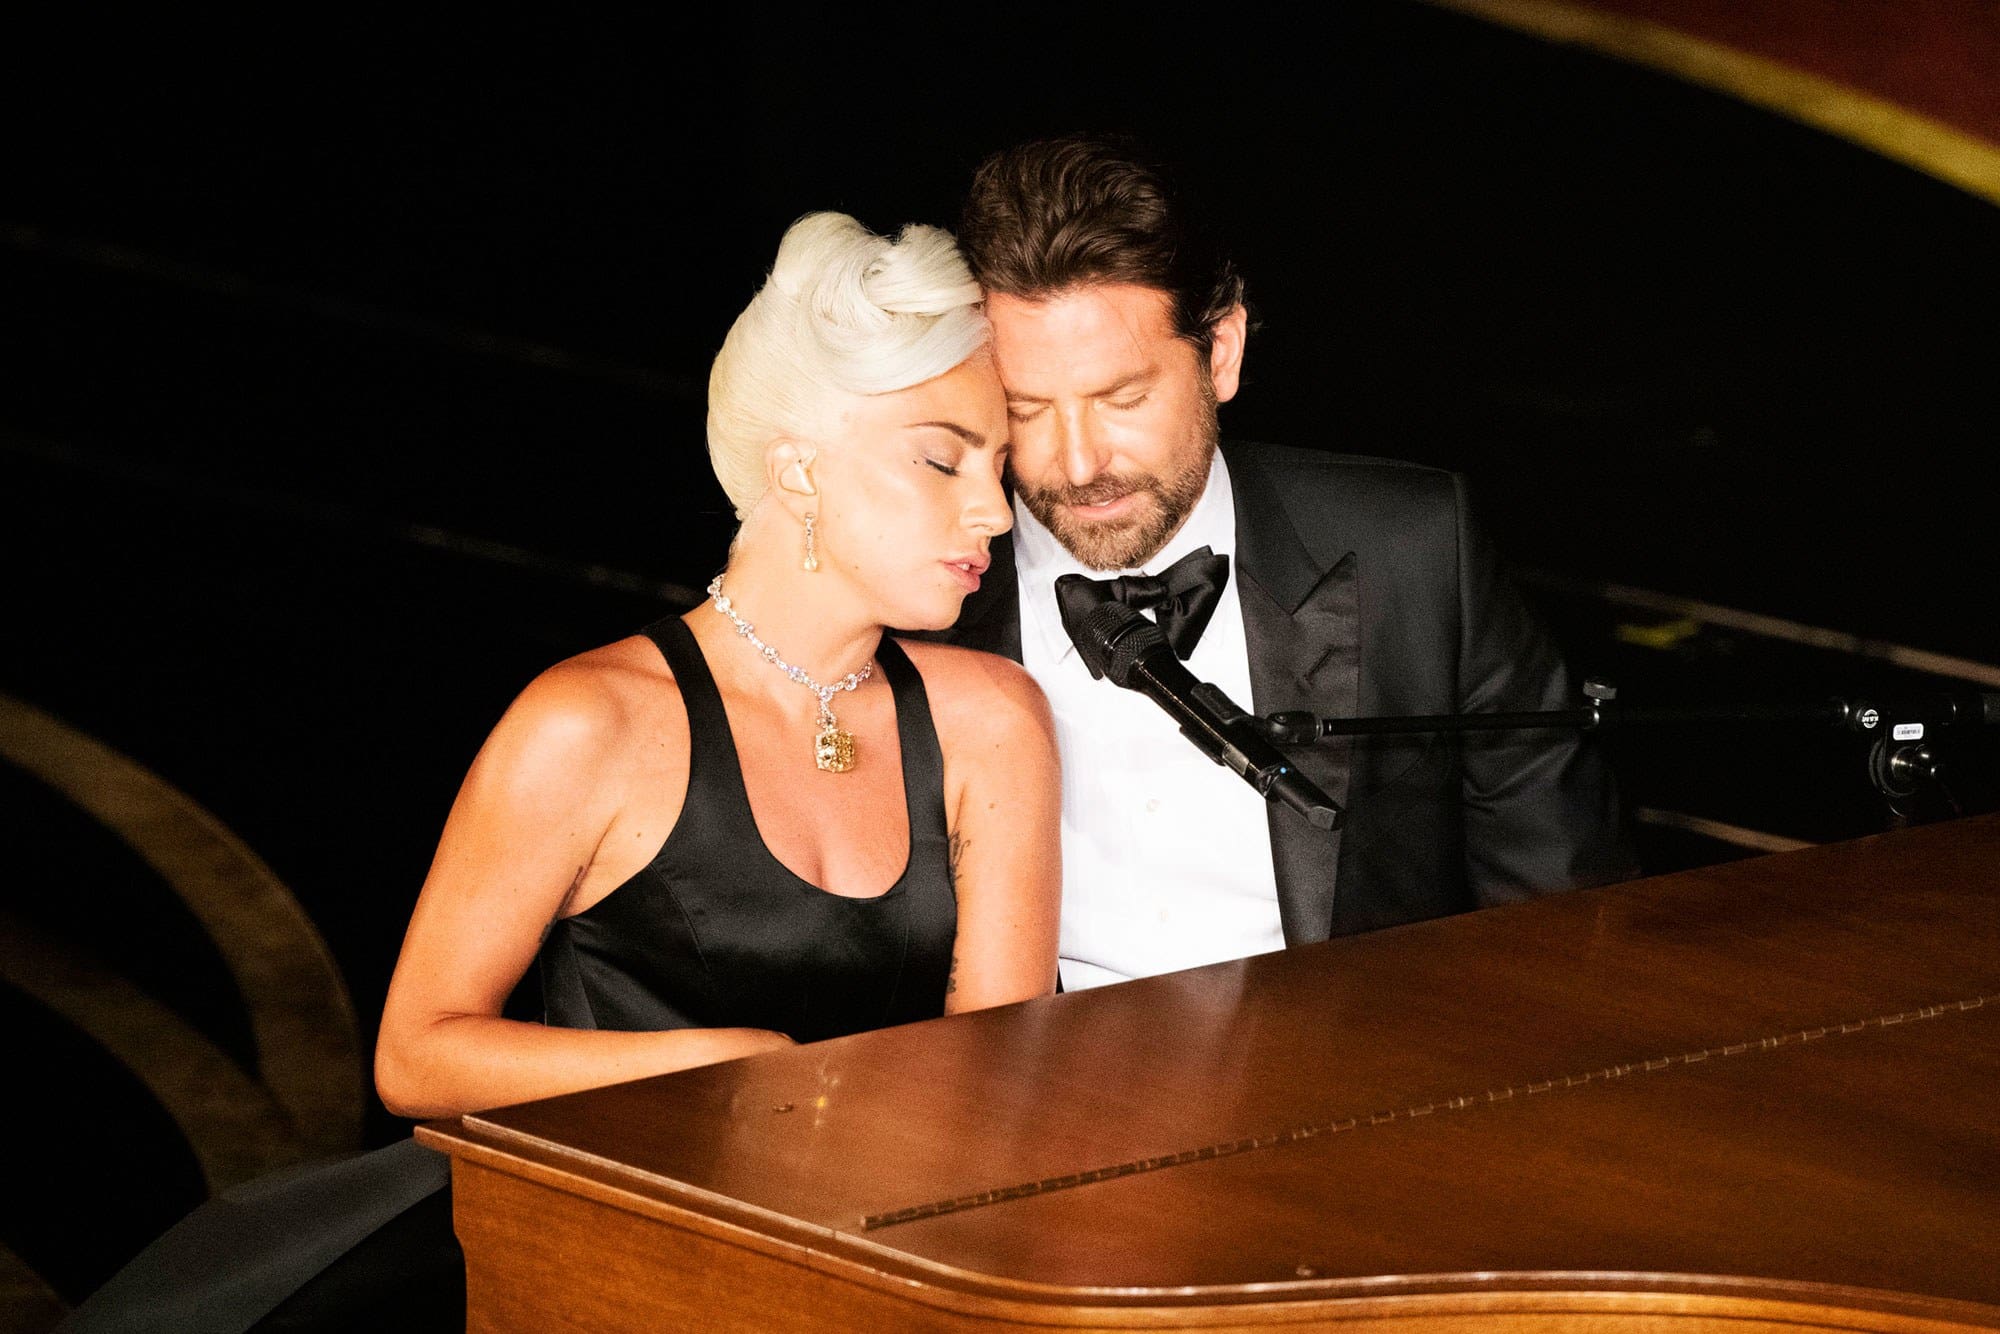 ”lady-gaga-talks-romantic-bradley-cooper-oscars-performance-reveals-they-tried-to-fool-everyone-into-believing-theyre-really-in-love”